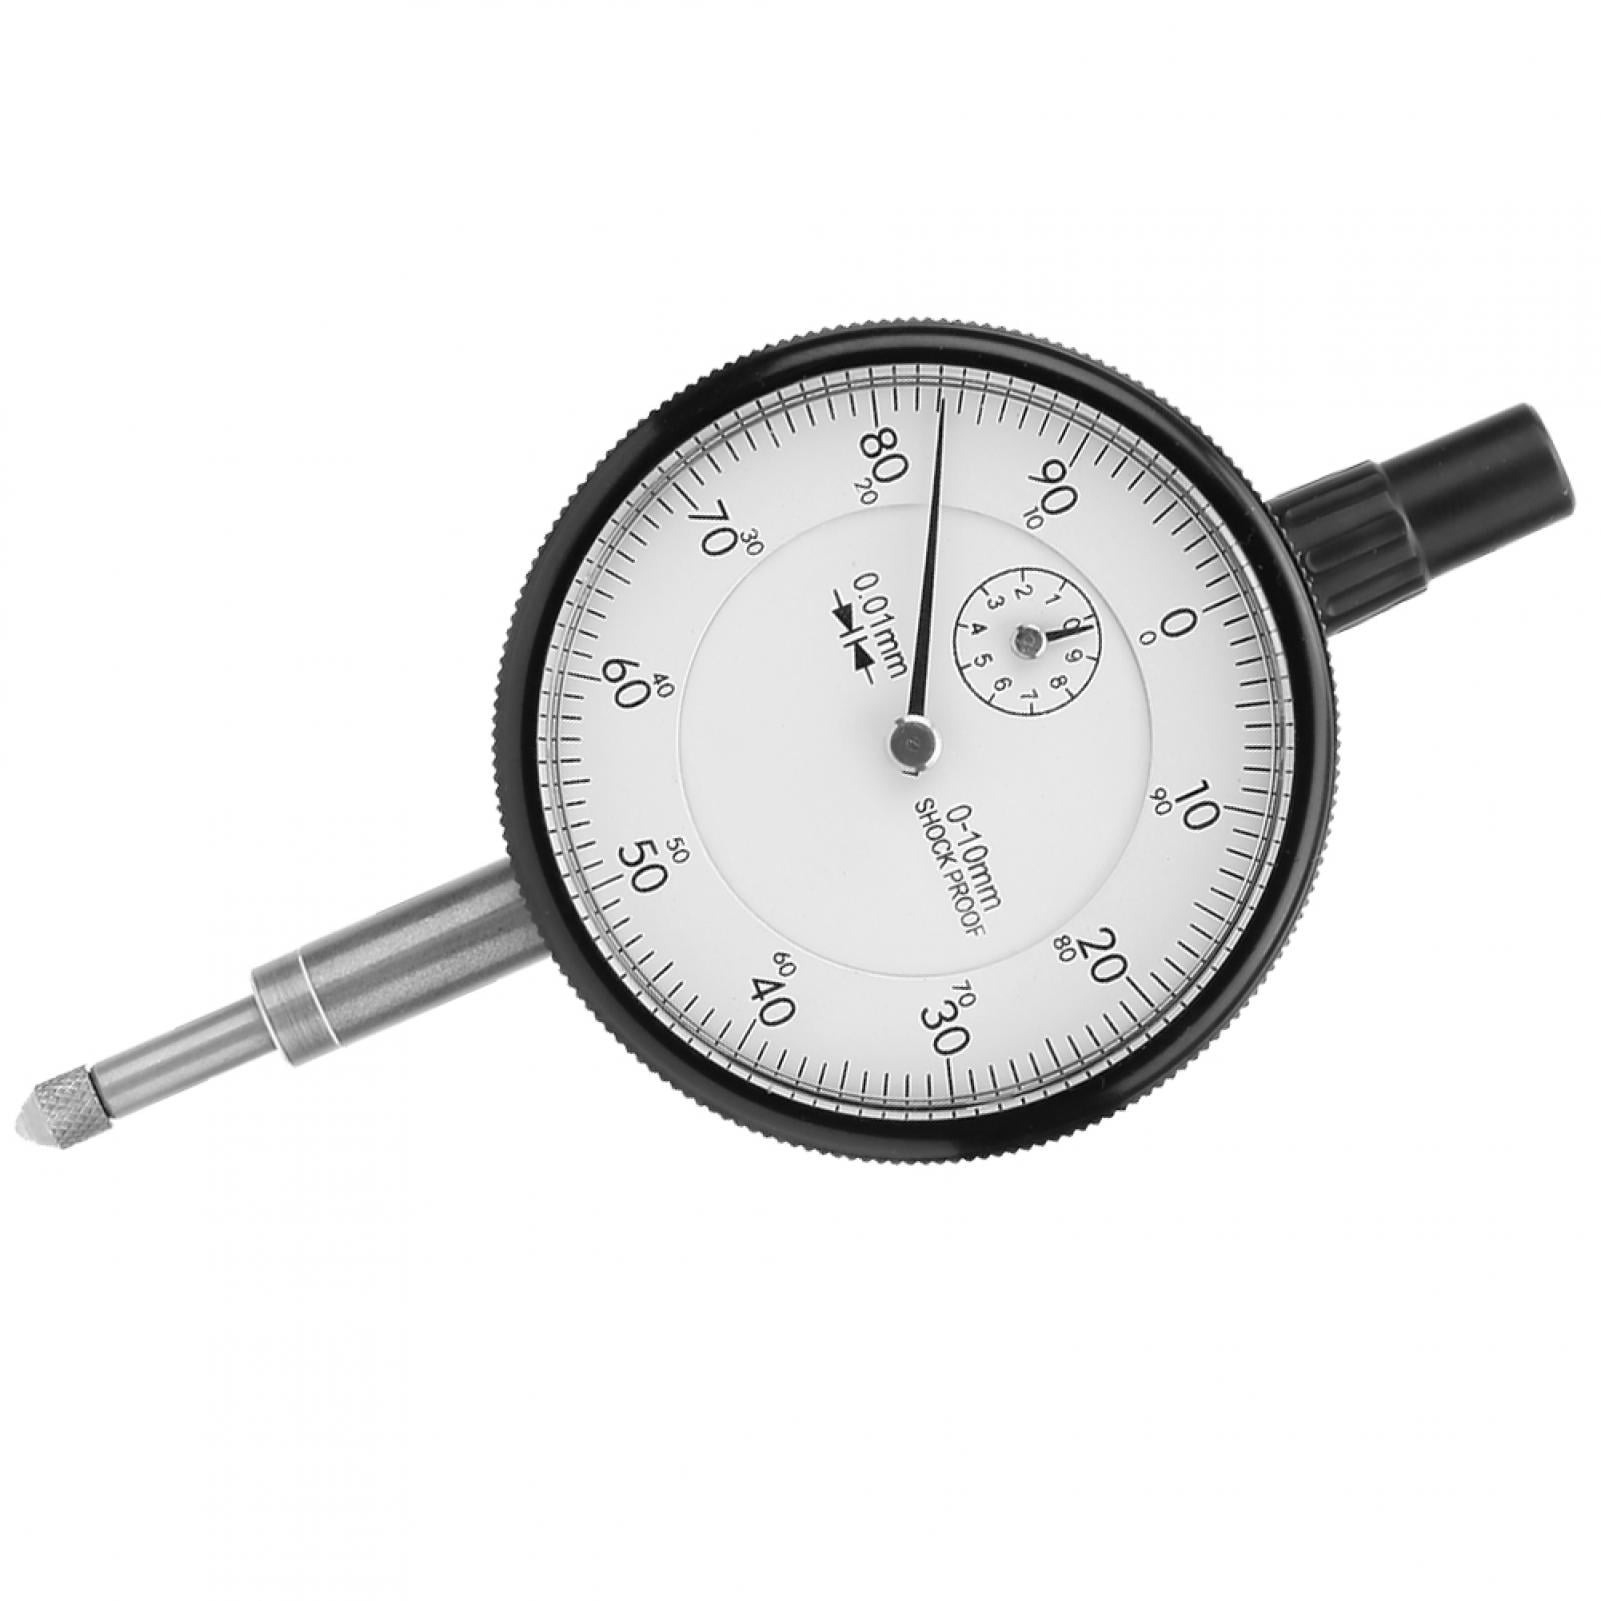 Measurement Instrument Gauge Professional Dial Gauge Easy to Carry Practical for Measuring Tool Industrial Hardware Measuring Equipment Industrial Supplies 